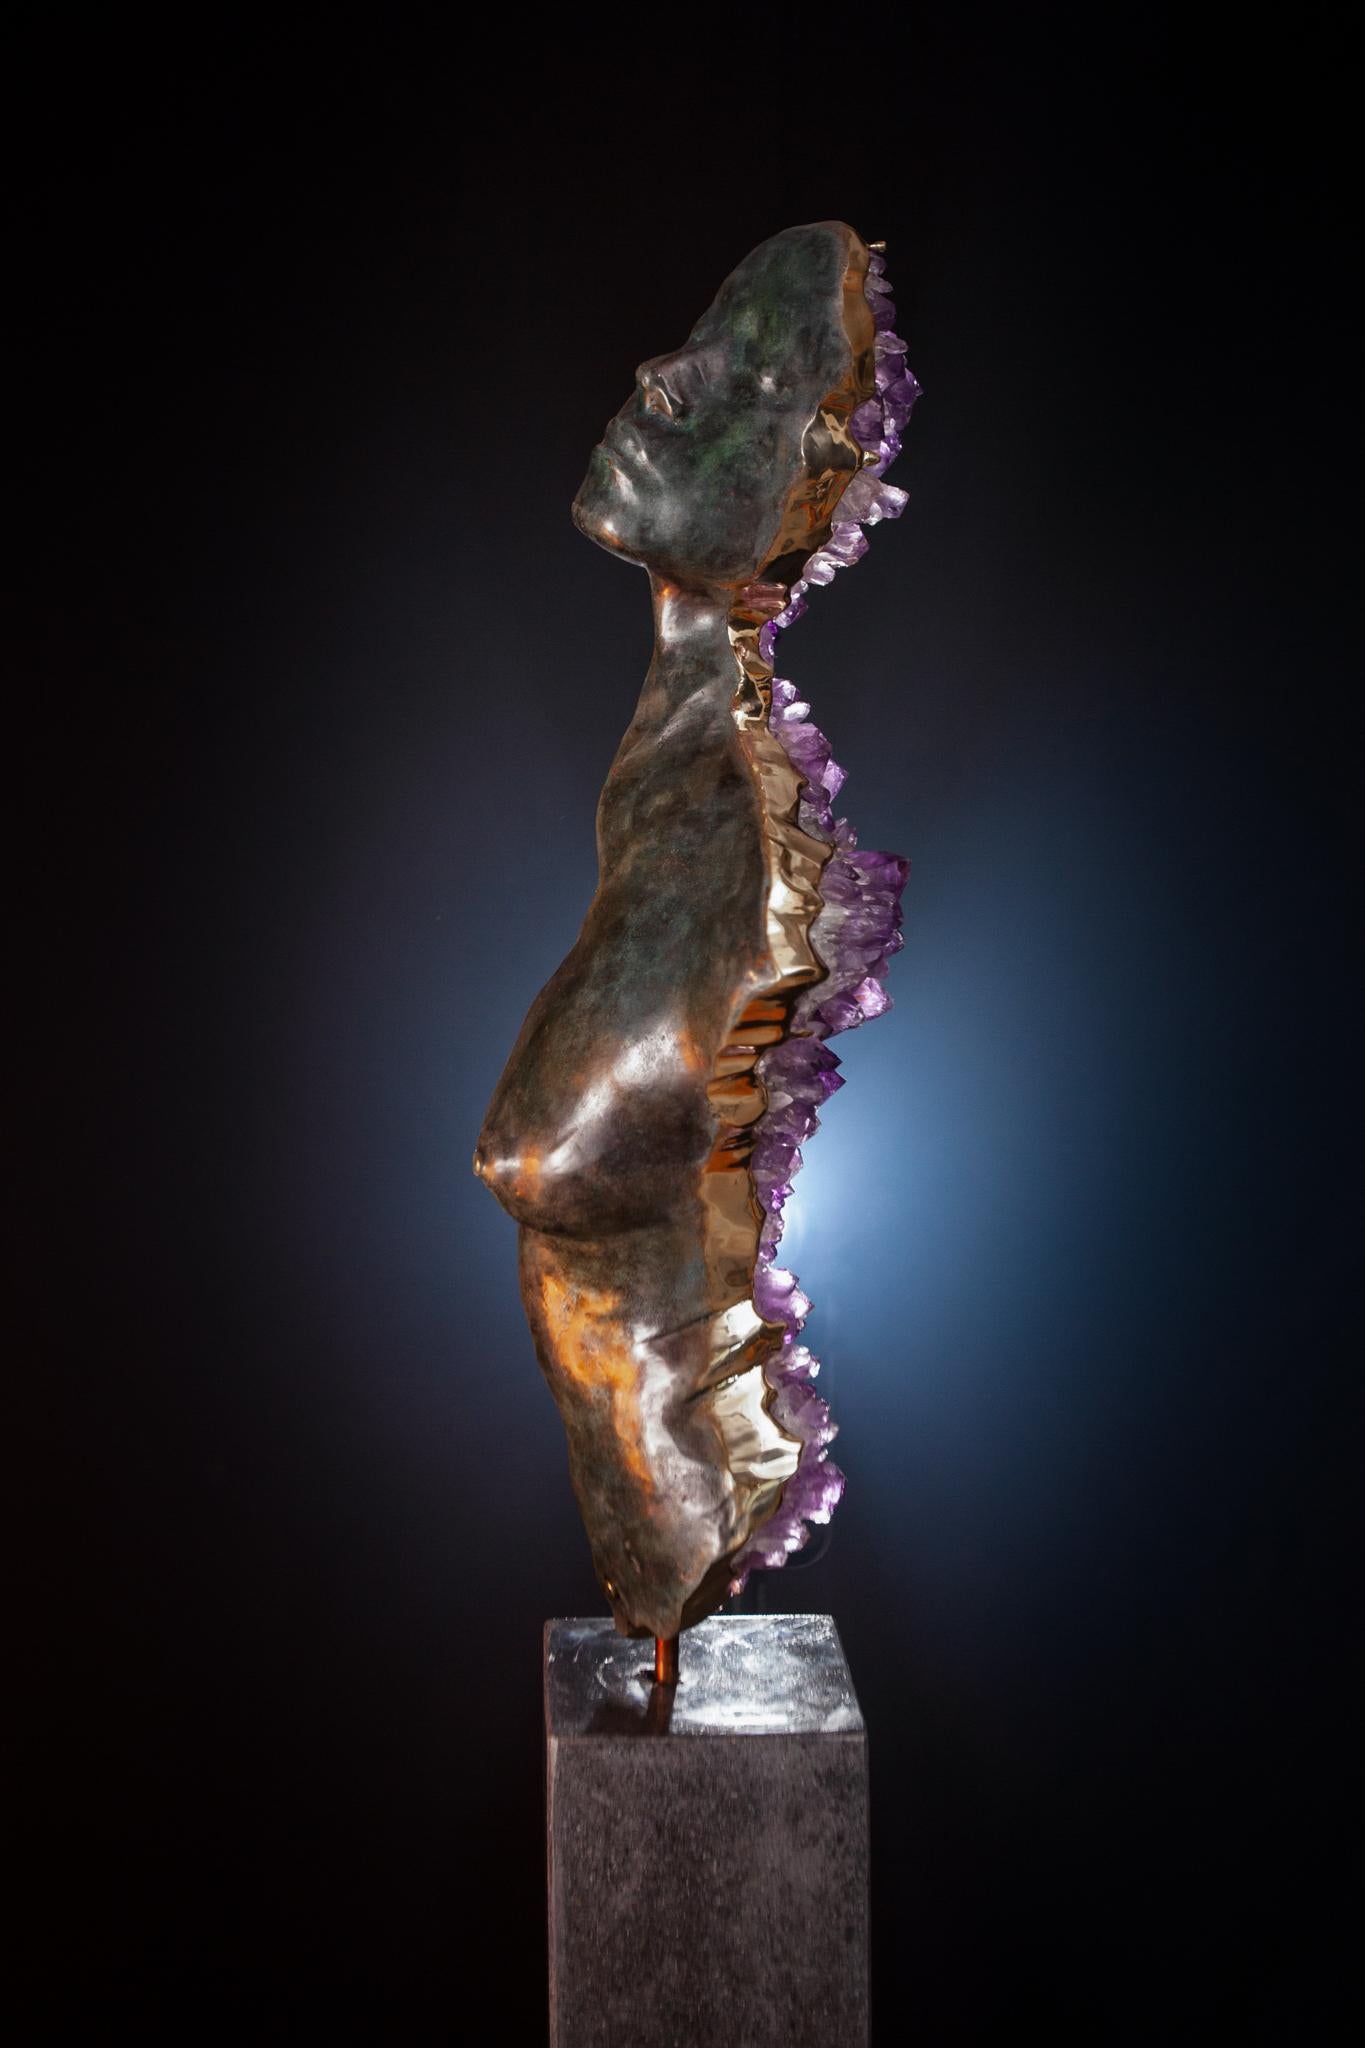 James Lomax Abstract Sculpture - LIMINAL STATE  Amethyst crystals, bronze sculpture